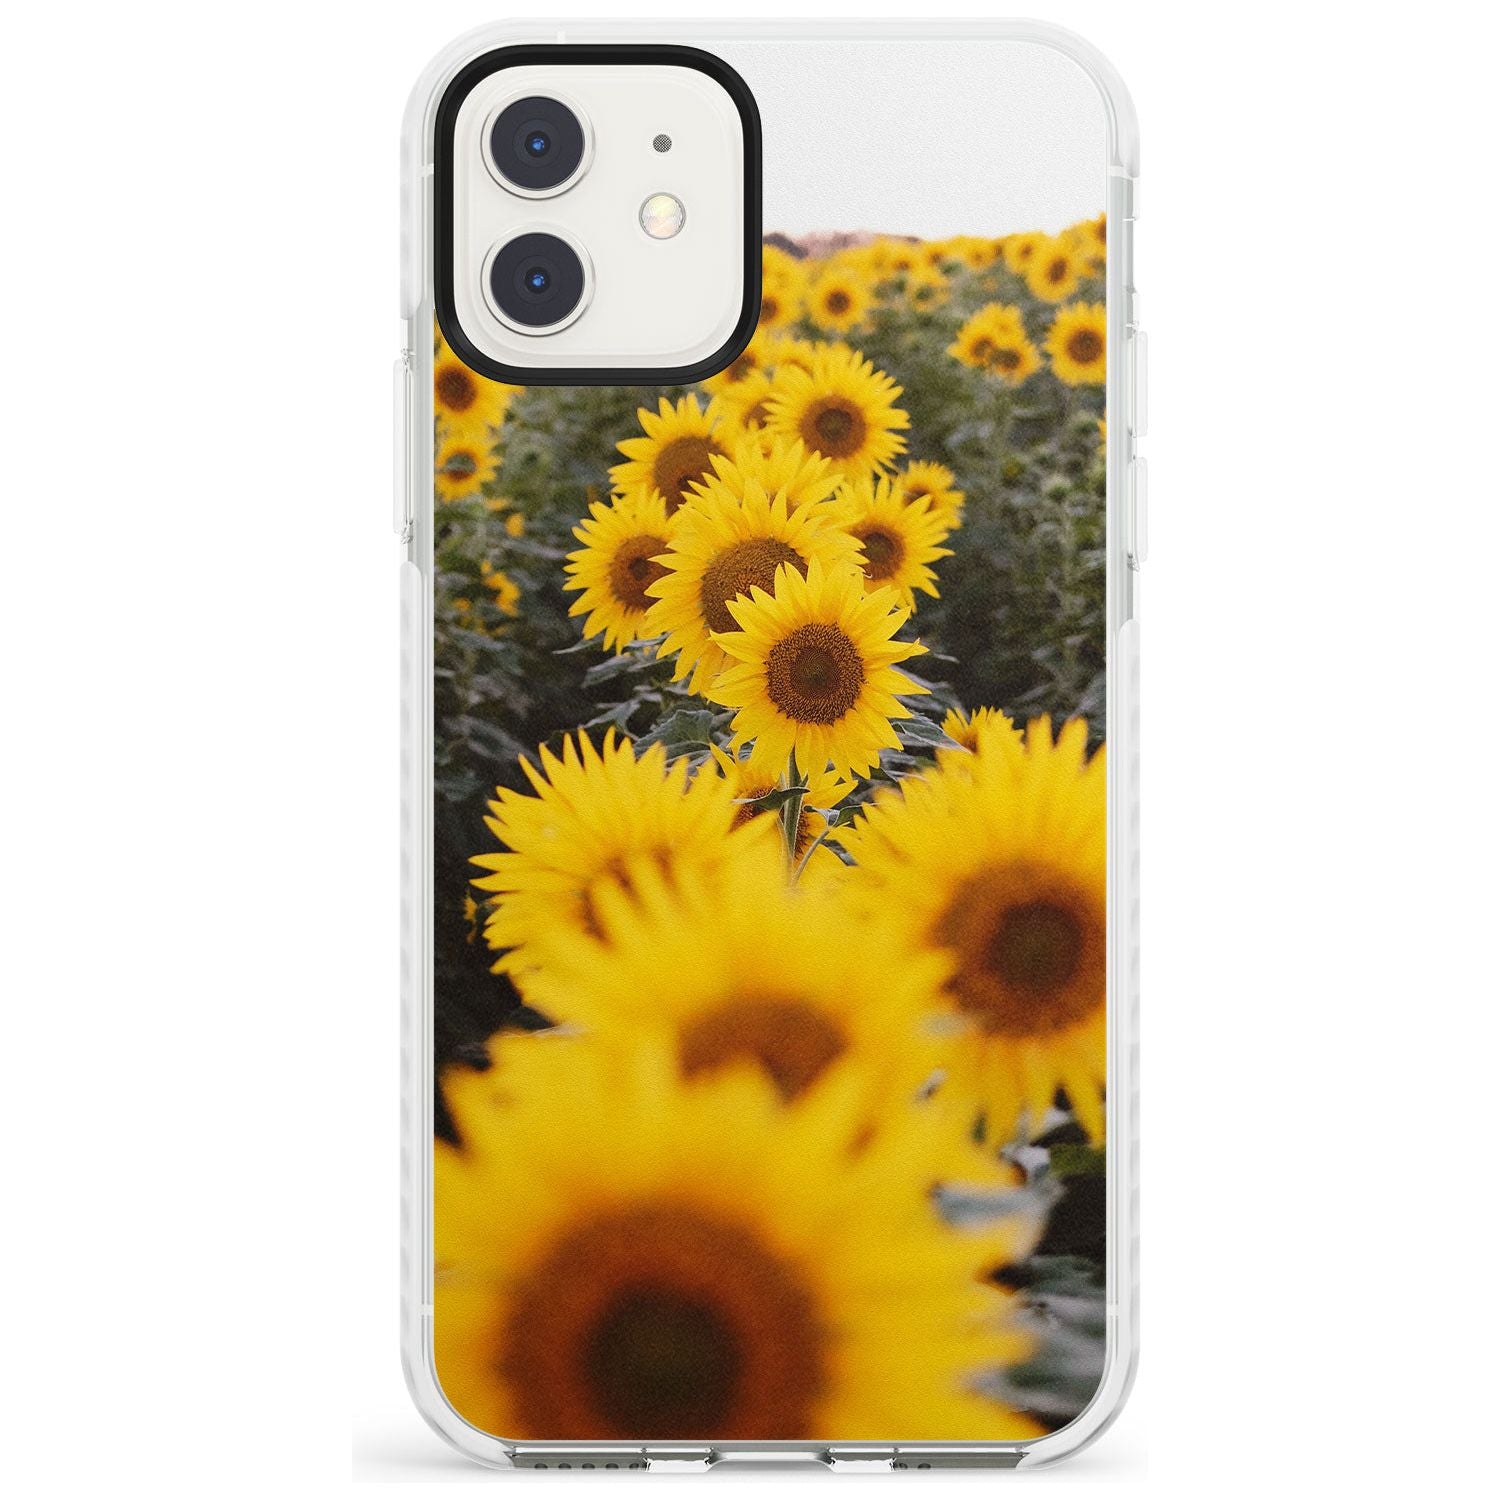 Sunflower Field Photograph Impact Phone Case for iPhone 11